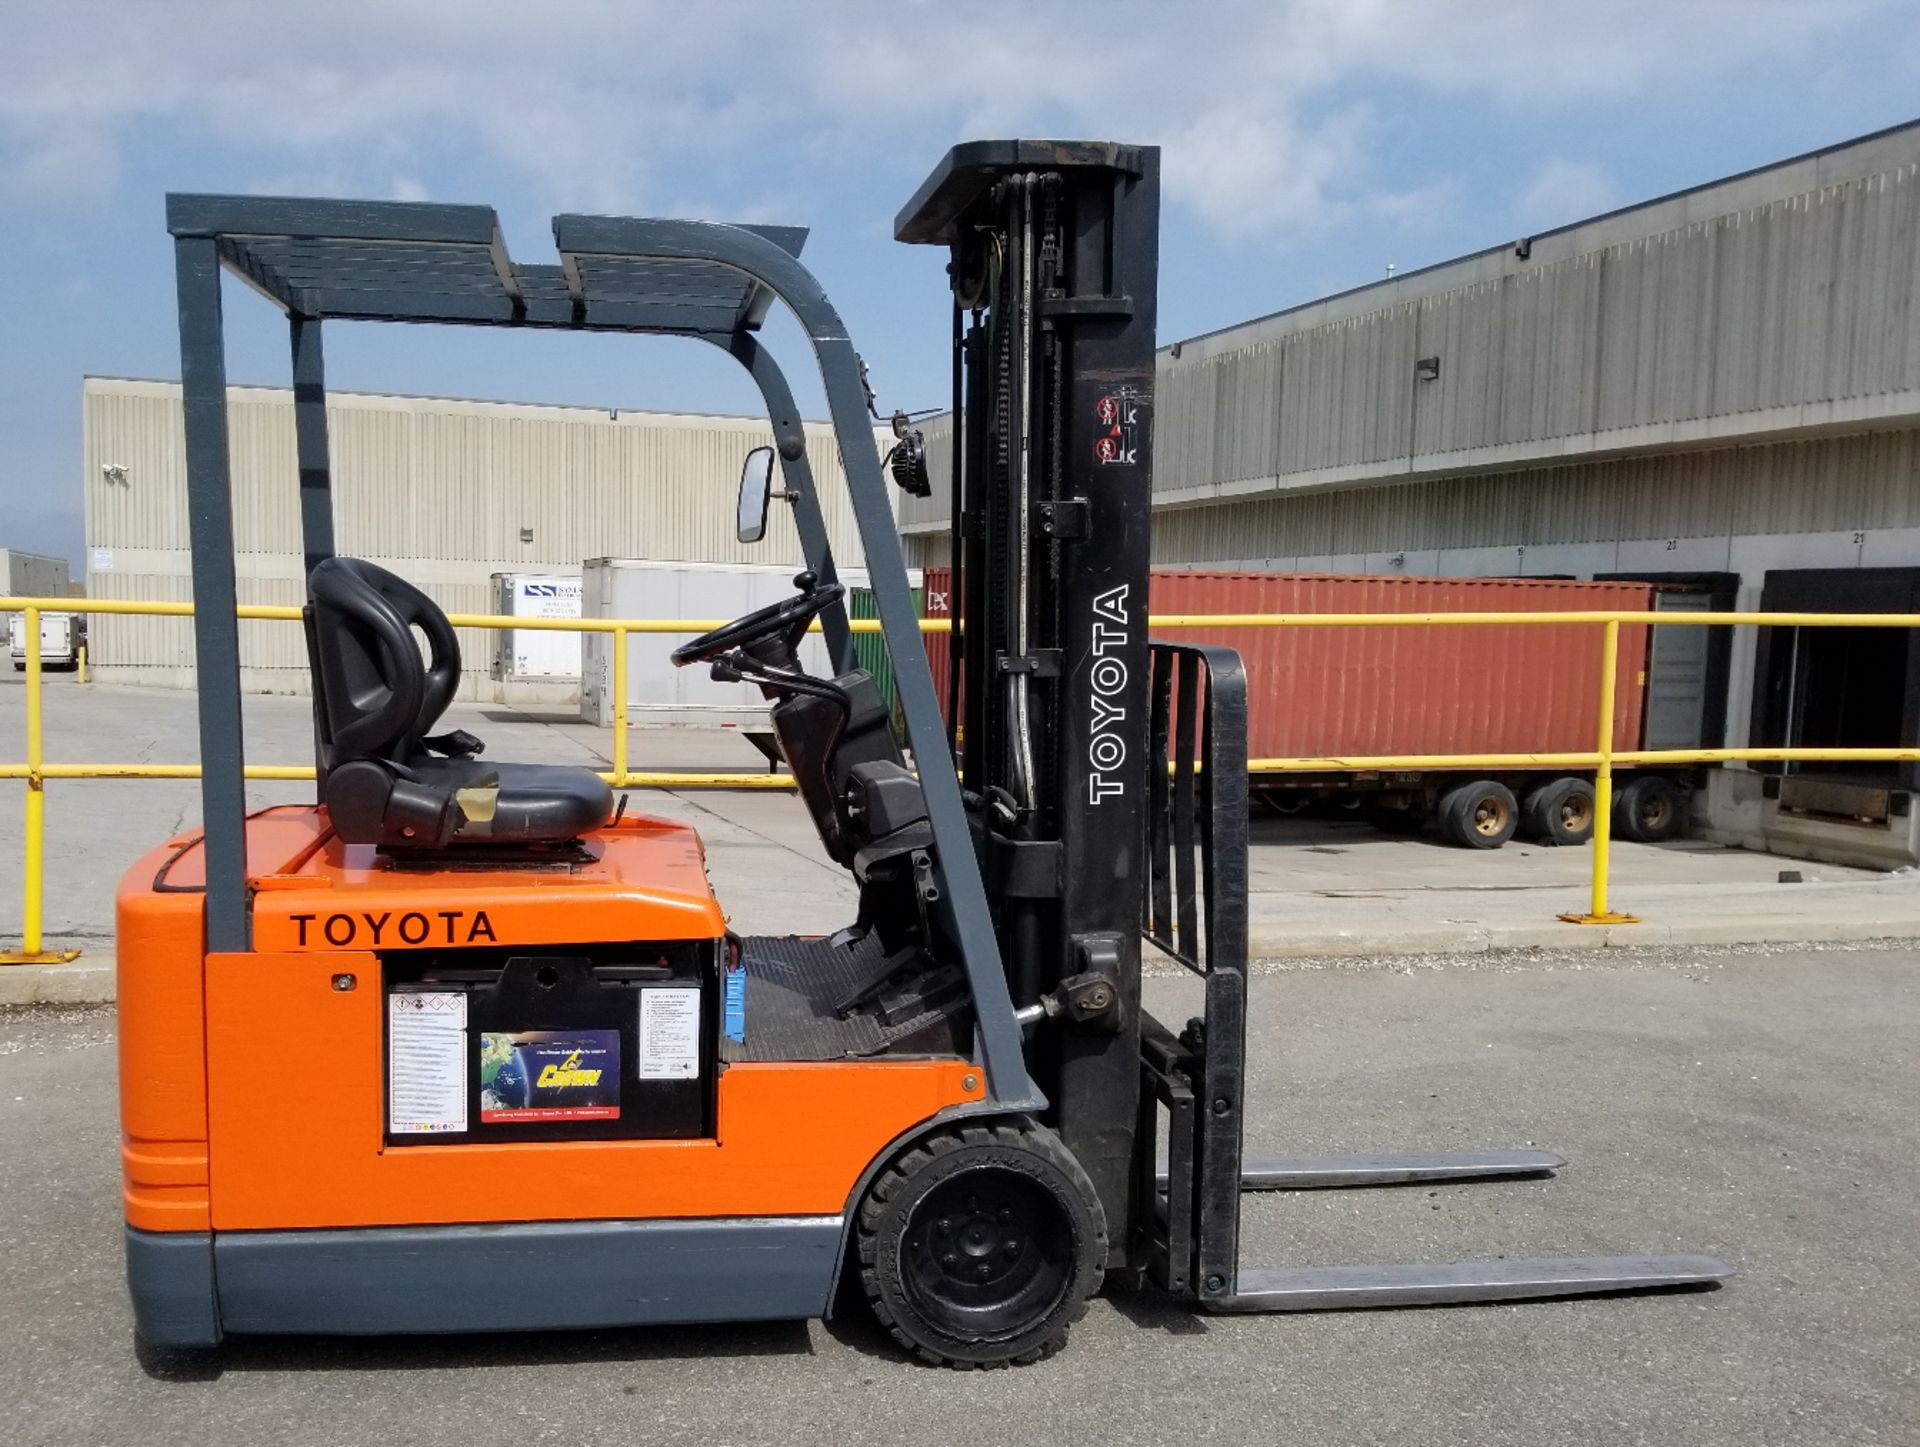 TOYOTA 5FBEC15 3000 LB. CAPACITY 48V 3-WHEEL ELECTRIC FORKLIFT WITH 185" MAX. VERTICAL LIFT, 3 STAGE